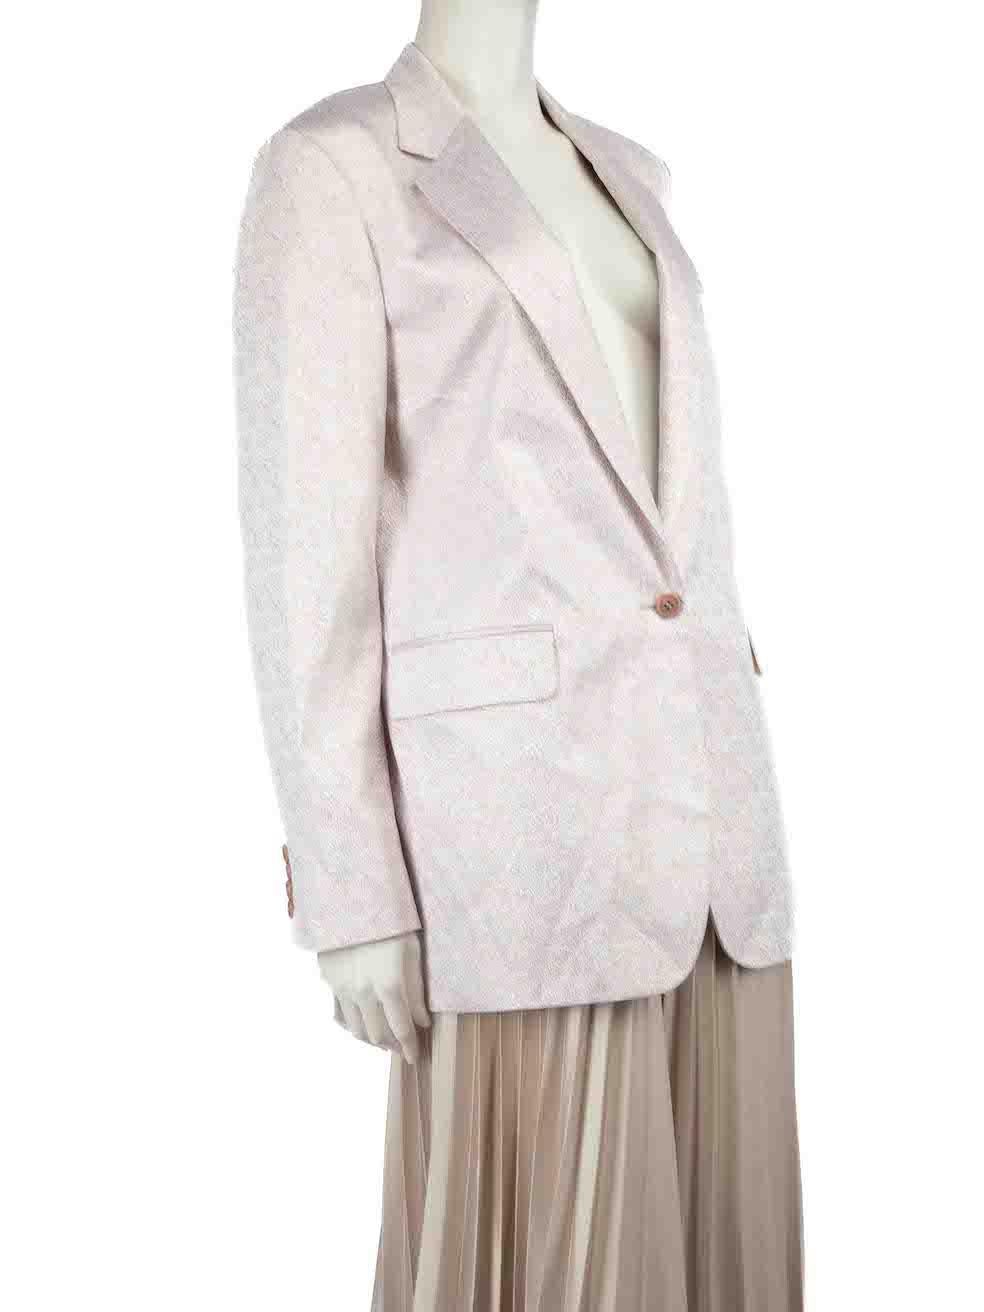 CONDITION is Never worn, with tags. No visible wear to blazer is evident on this new Dries Van Noten designer resale item.
 
 
 
 Details
 
 
 Pink metallic
 
 Viscose
 This luxury designer item fpre-owned unless stated otherwise and may have signs